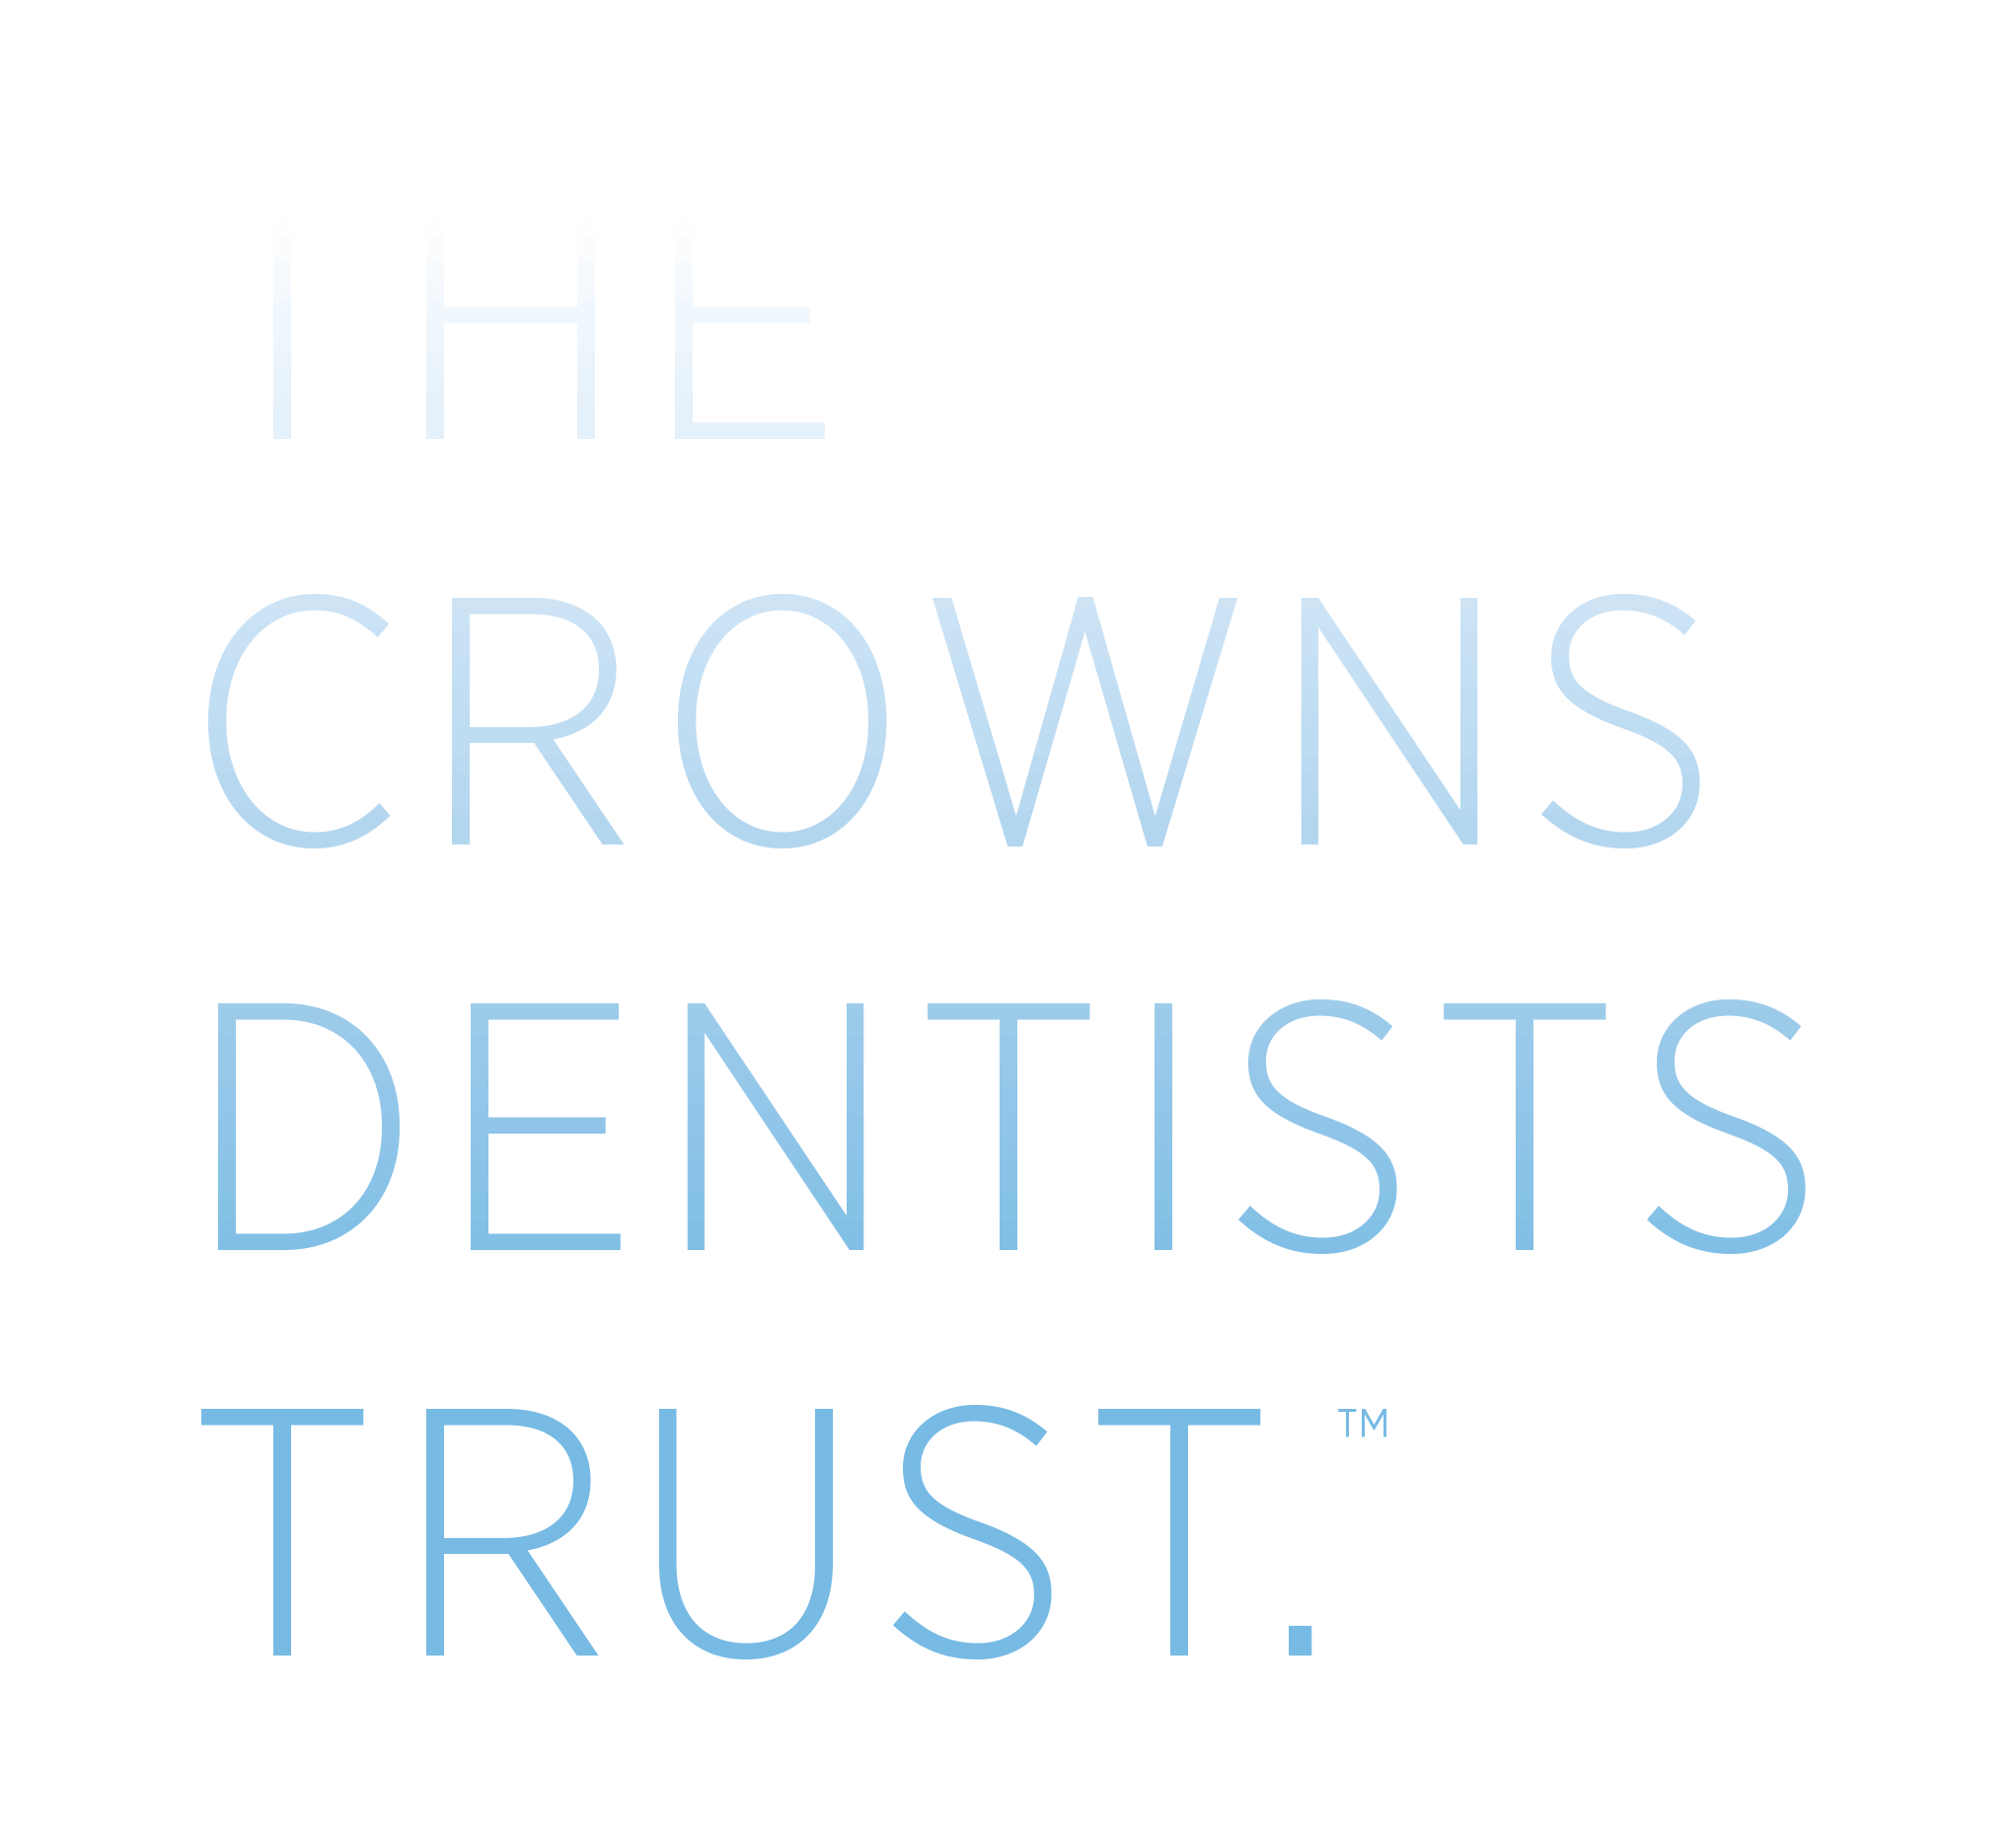 The Pediatric Crowns Dentists Trust – Dental Crowns for Primary Teeth